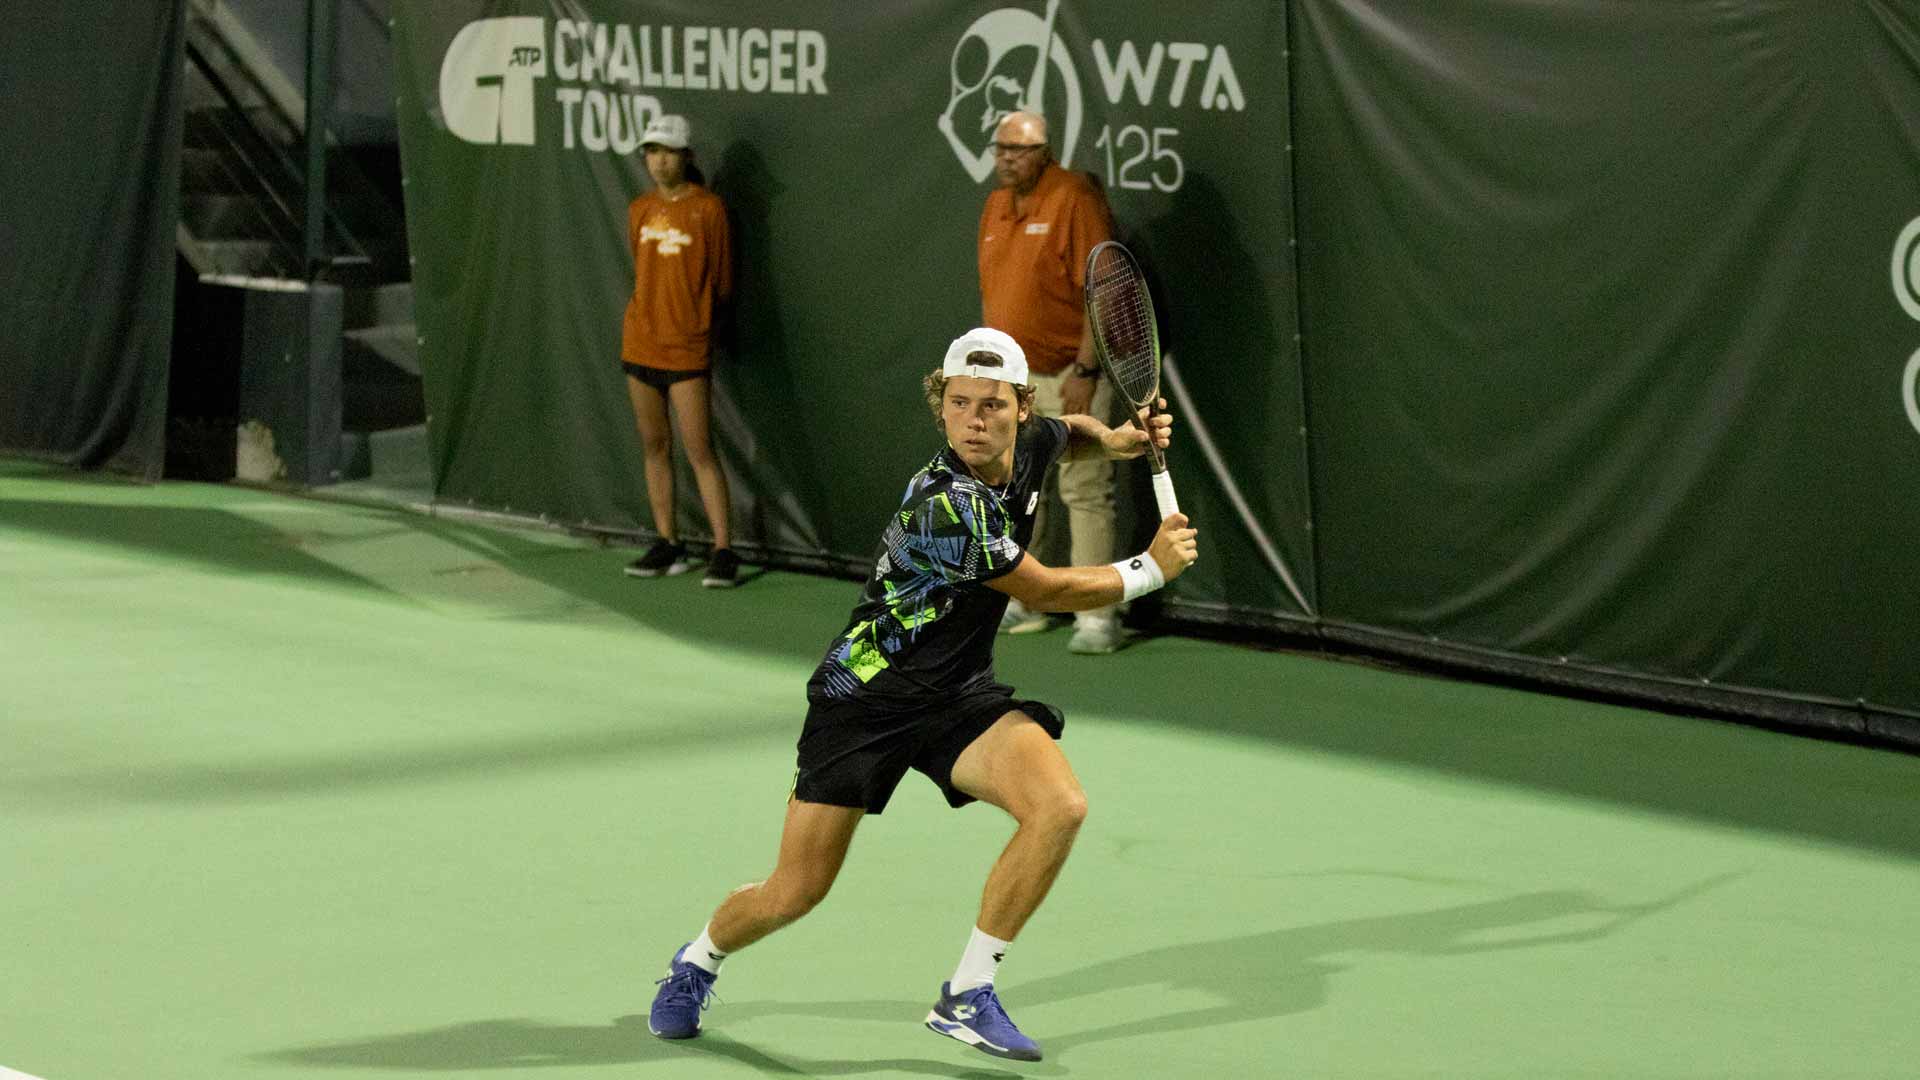 Golden Gate Open Challenger Event/WTA 125 Combine For Equal Prize Money ATP Tour Tennis